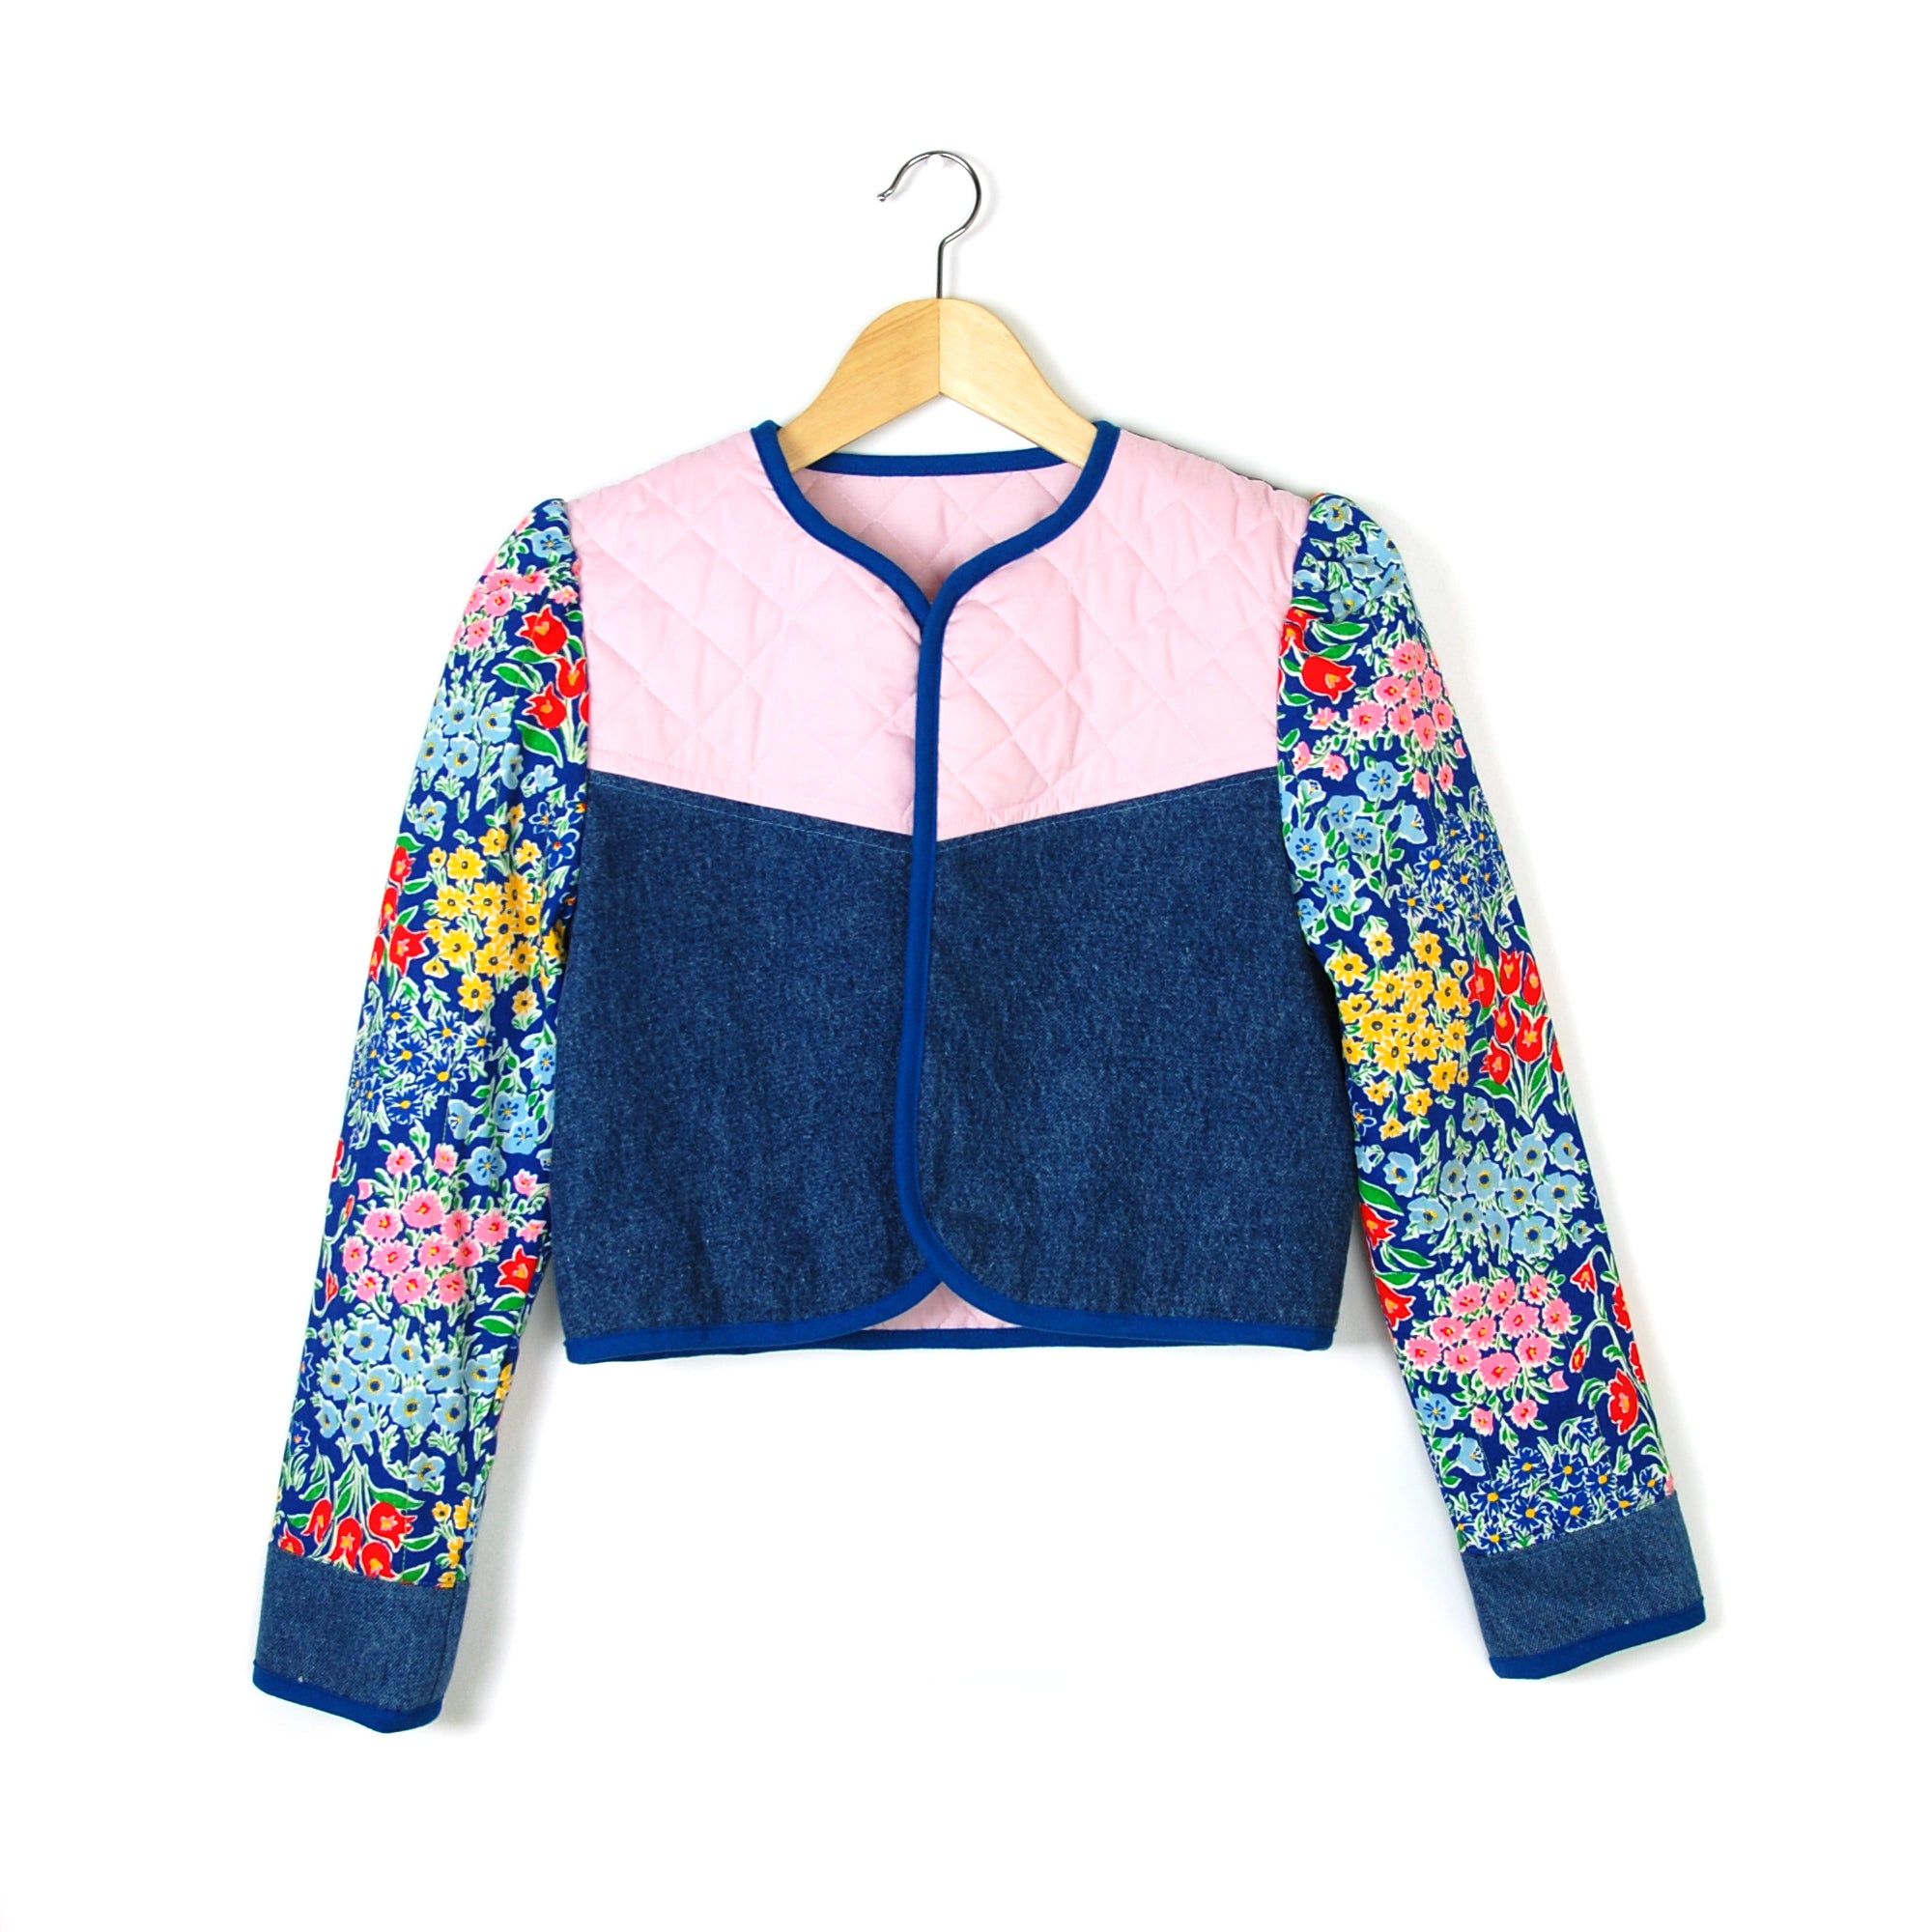 THE LONELY DOLL QUILTED JACKET - Late to the Party